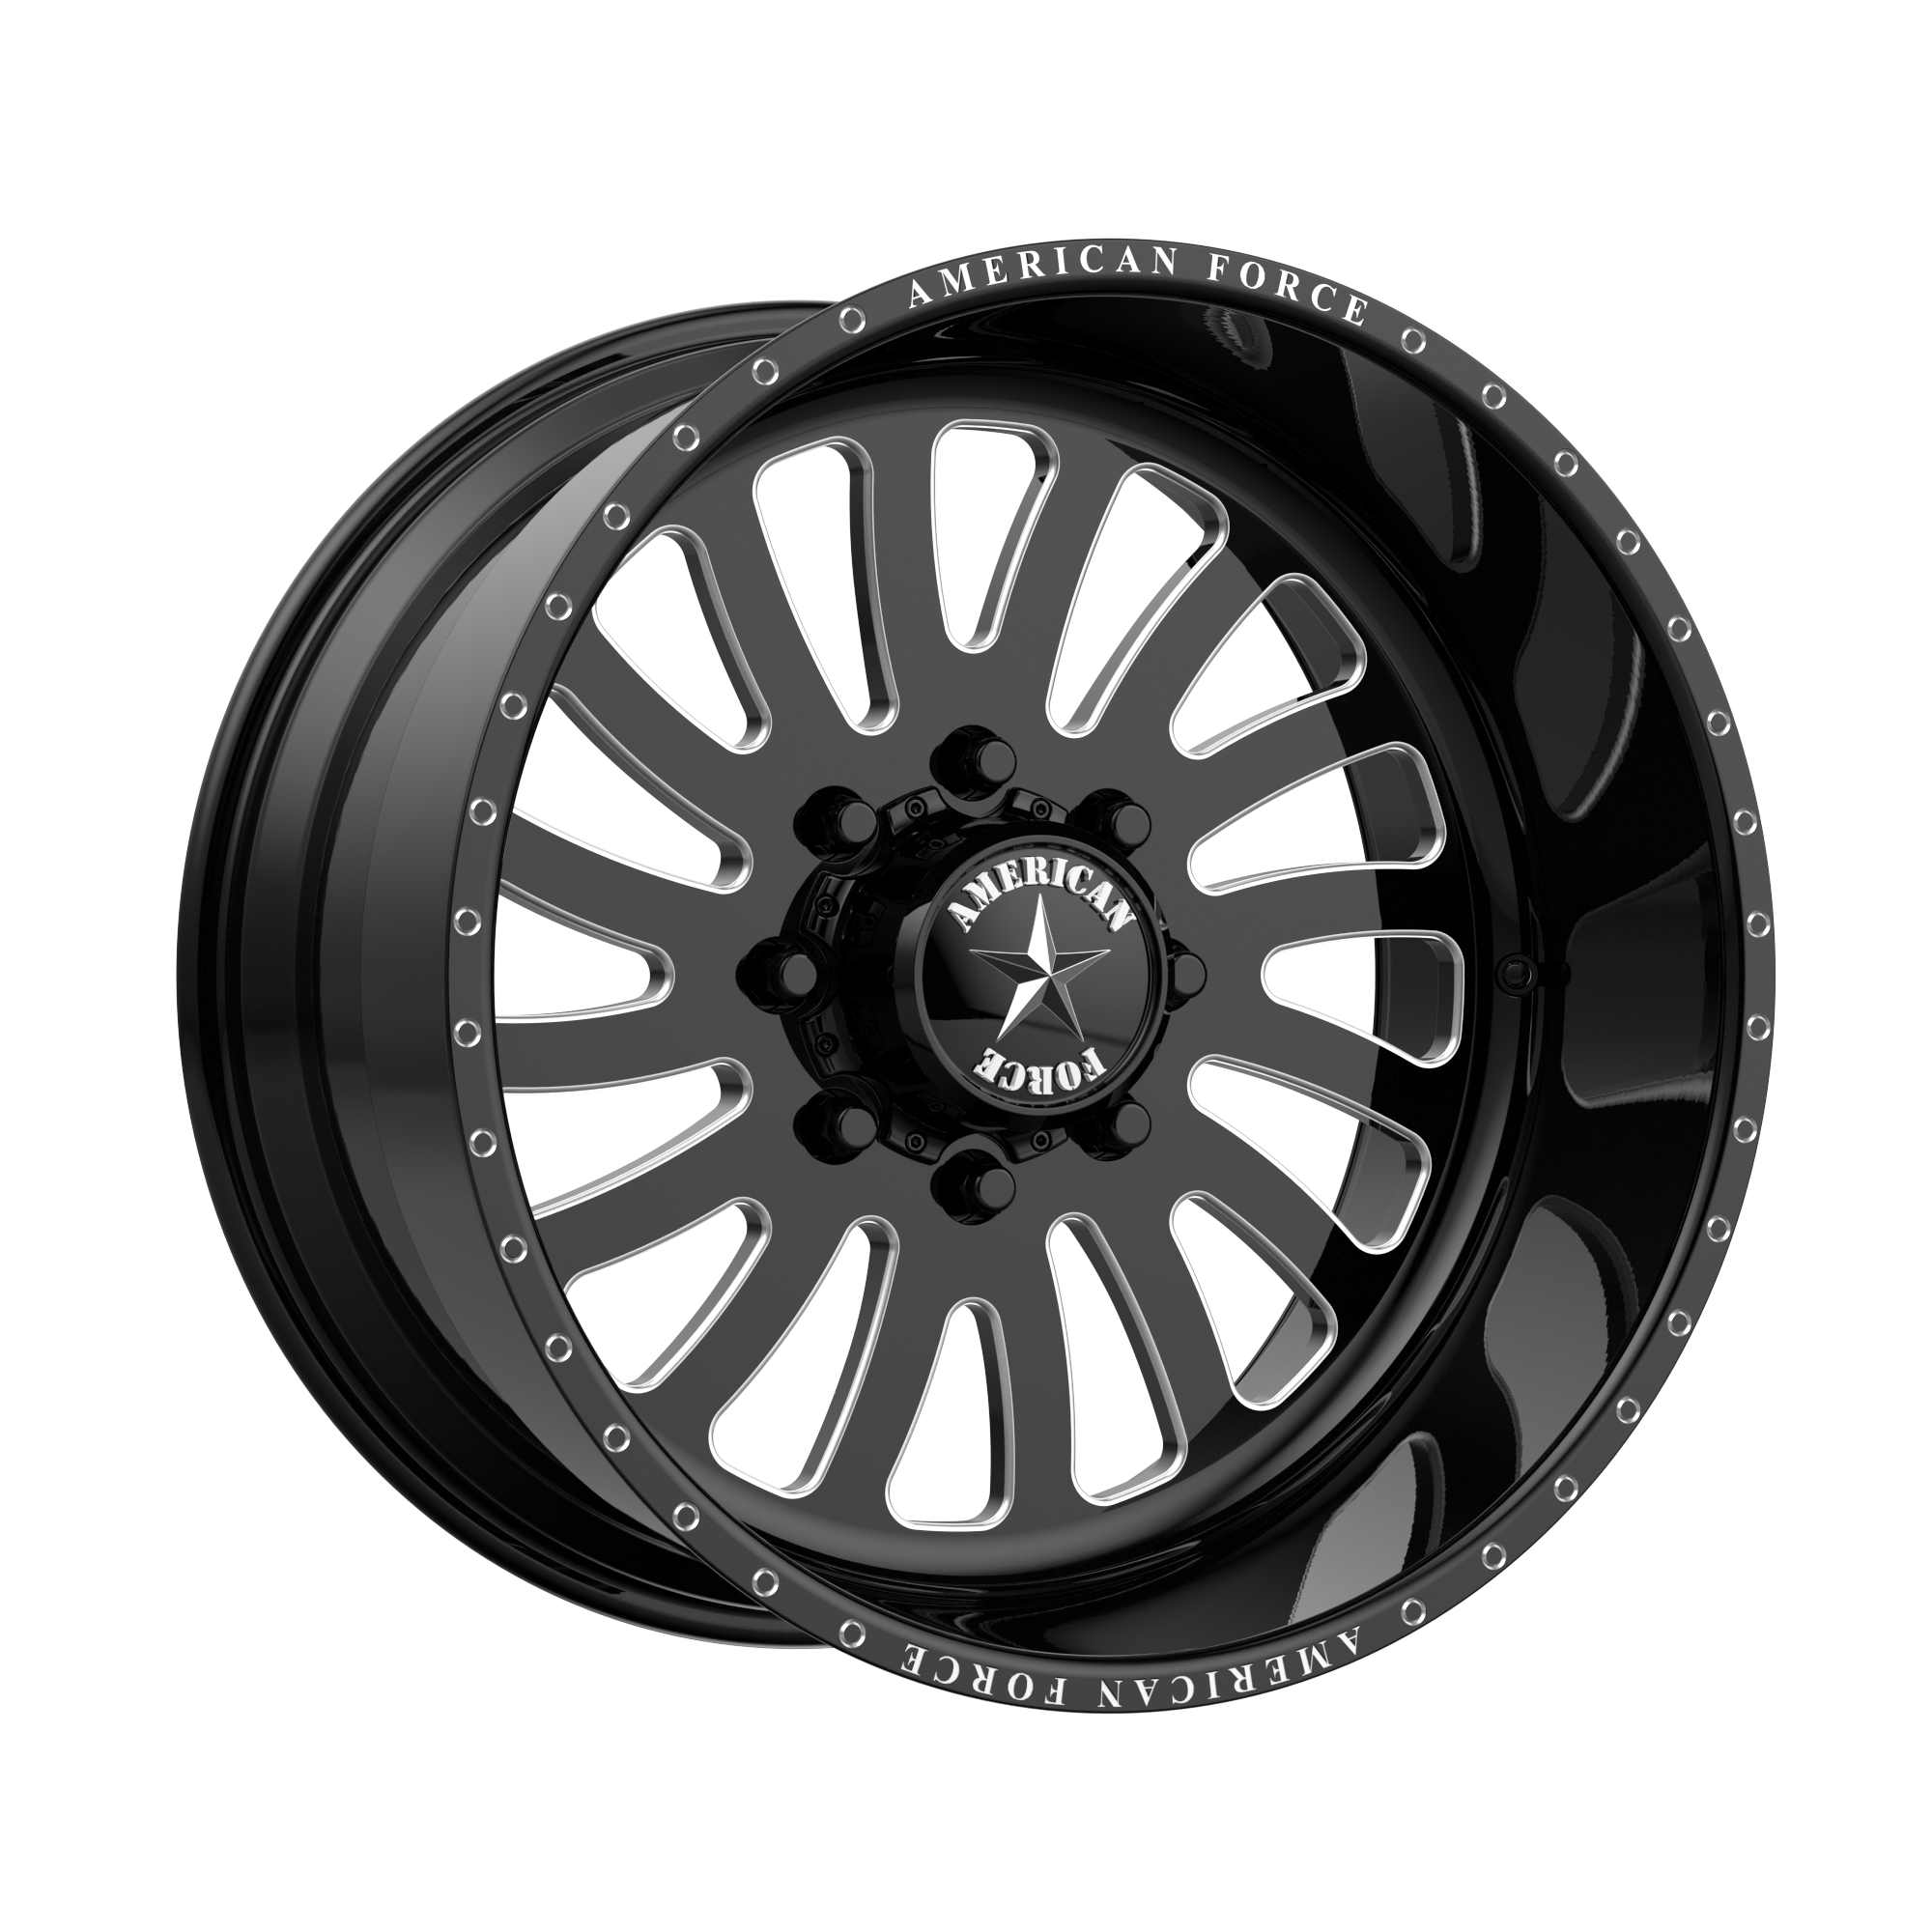 OCTANE SS 26x16 8x165.10 GLOSS BLACK MACHINED (-101 mm) - Tires and Engine Performance